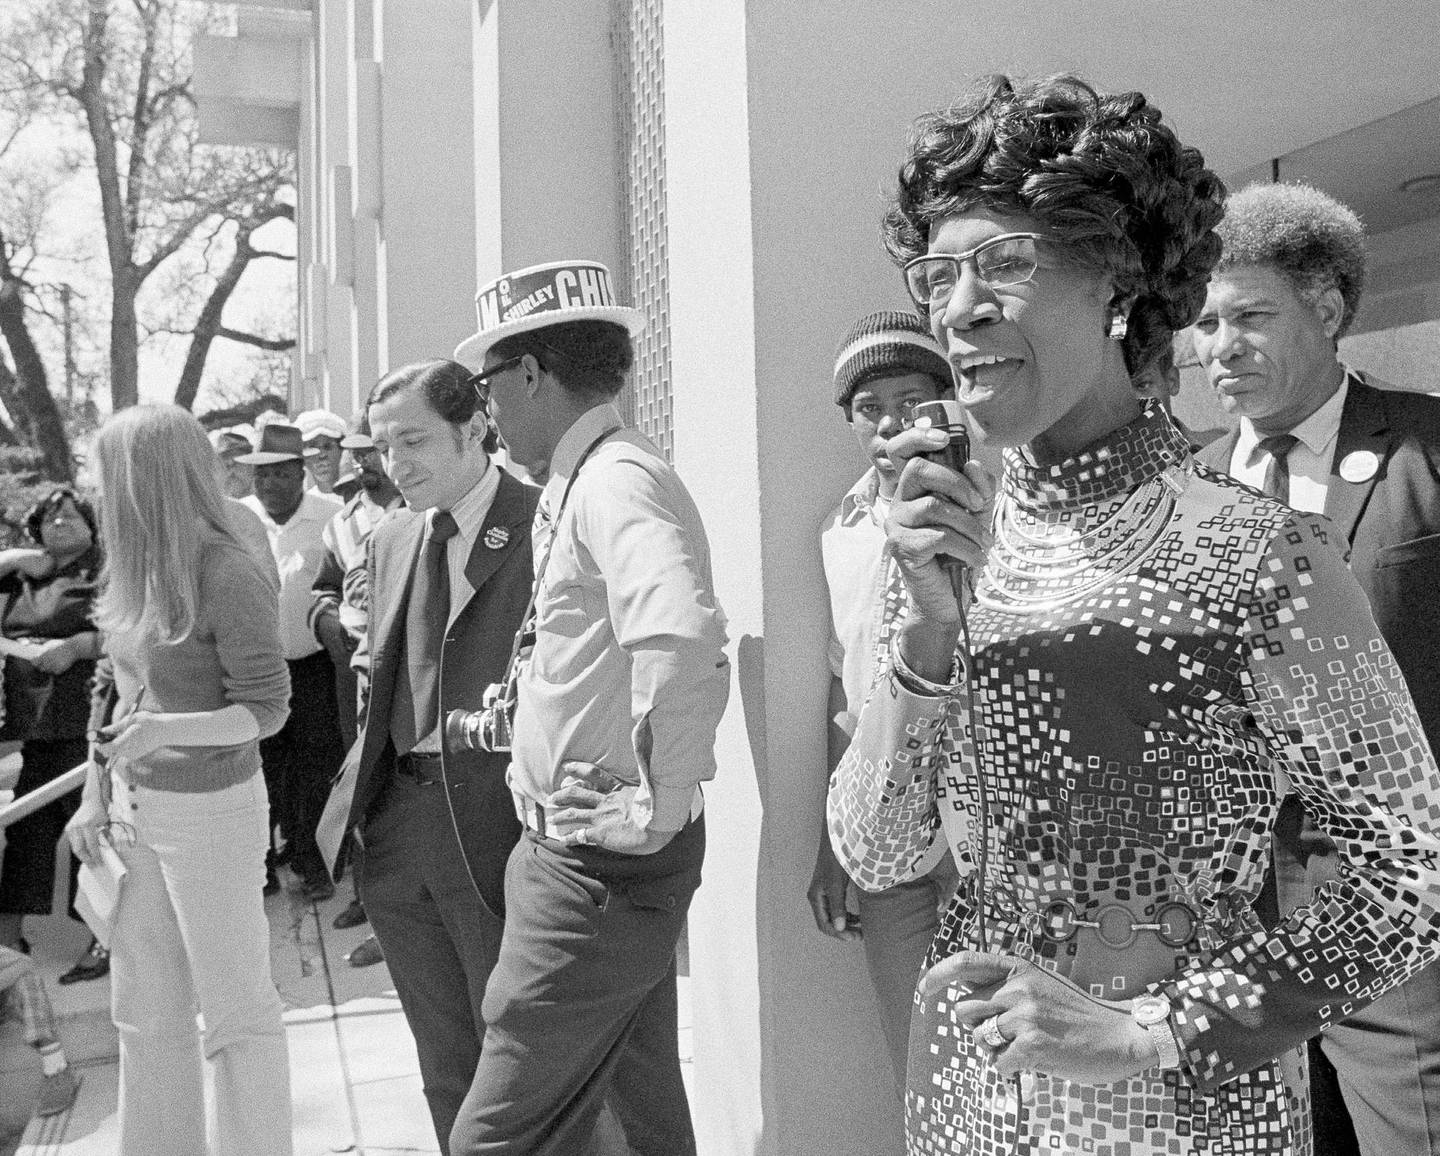 FILE - In this March 11, 1972, file photo, Rep. Shirley Chisholm, D-NY, addresses a crowd of several hundred on the steps of the Jackson County court house in Marianna, Fla. Chisholm was stumping the panhandle of north Florida seeking votes in Florida's presidential primary. Running as a Democrat, Chisholm became the first black major-party presidential candidate, competing in 12 state primaries and winning 28 delegates. (AP Photo/Bill Hudson, File)